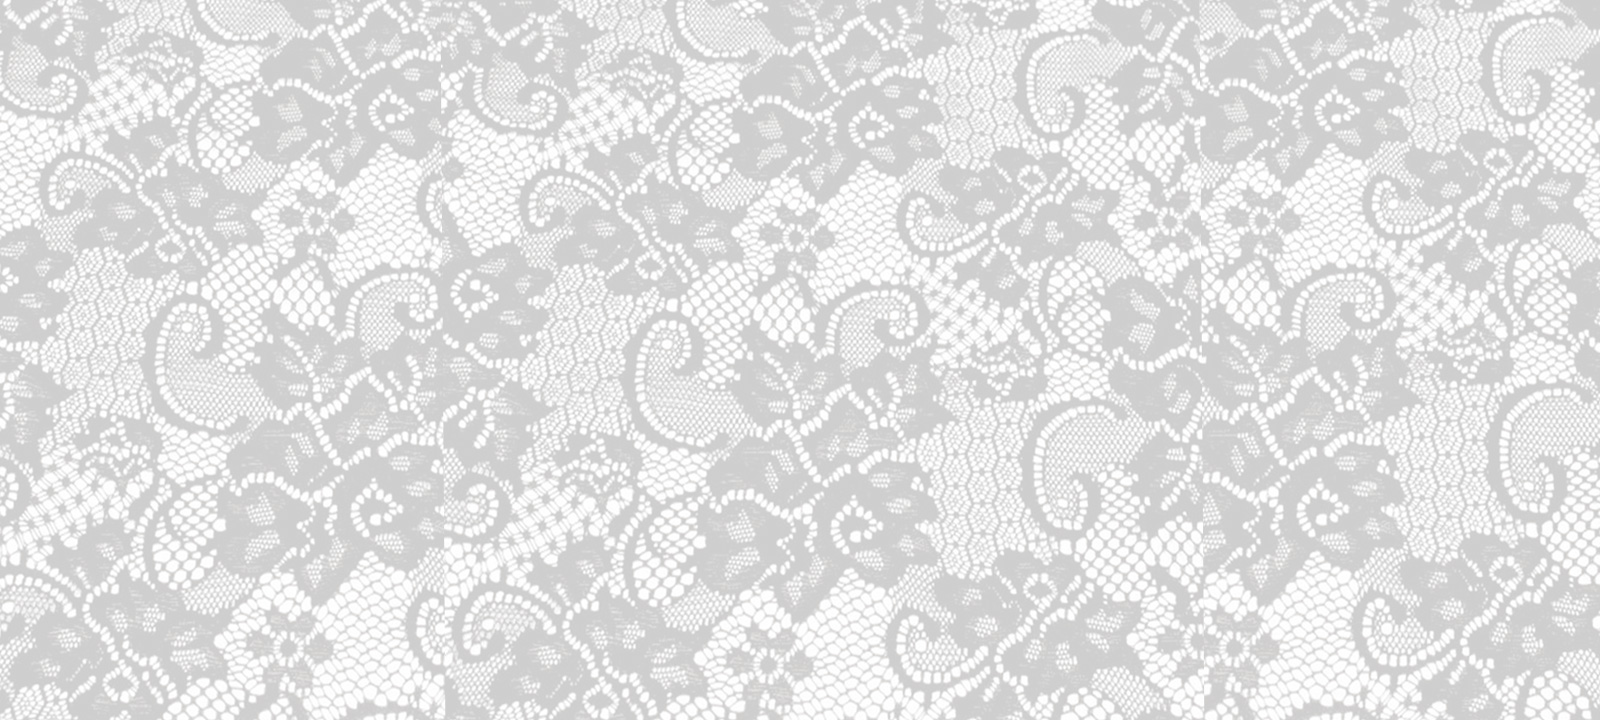 Lace Wallpaper Background On